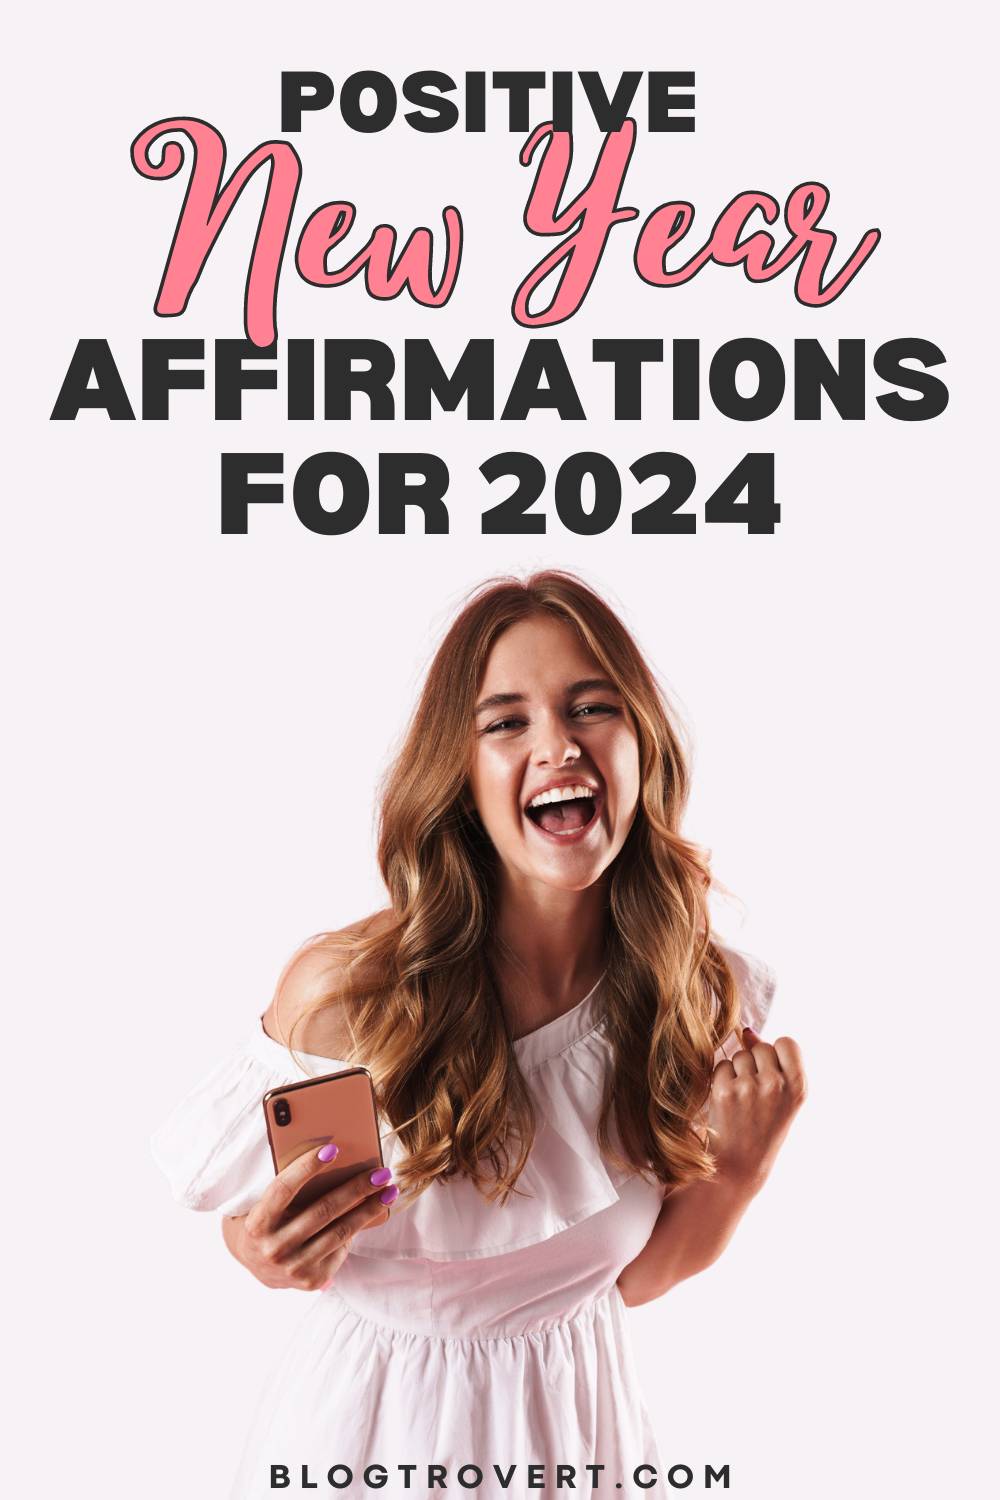 161 Positive New Year Affirmations for 2024